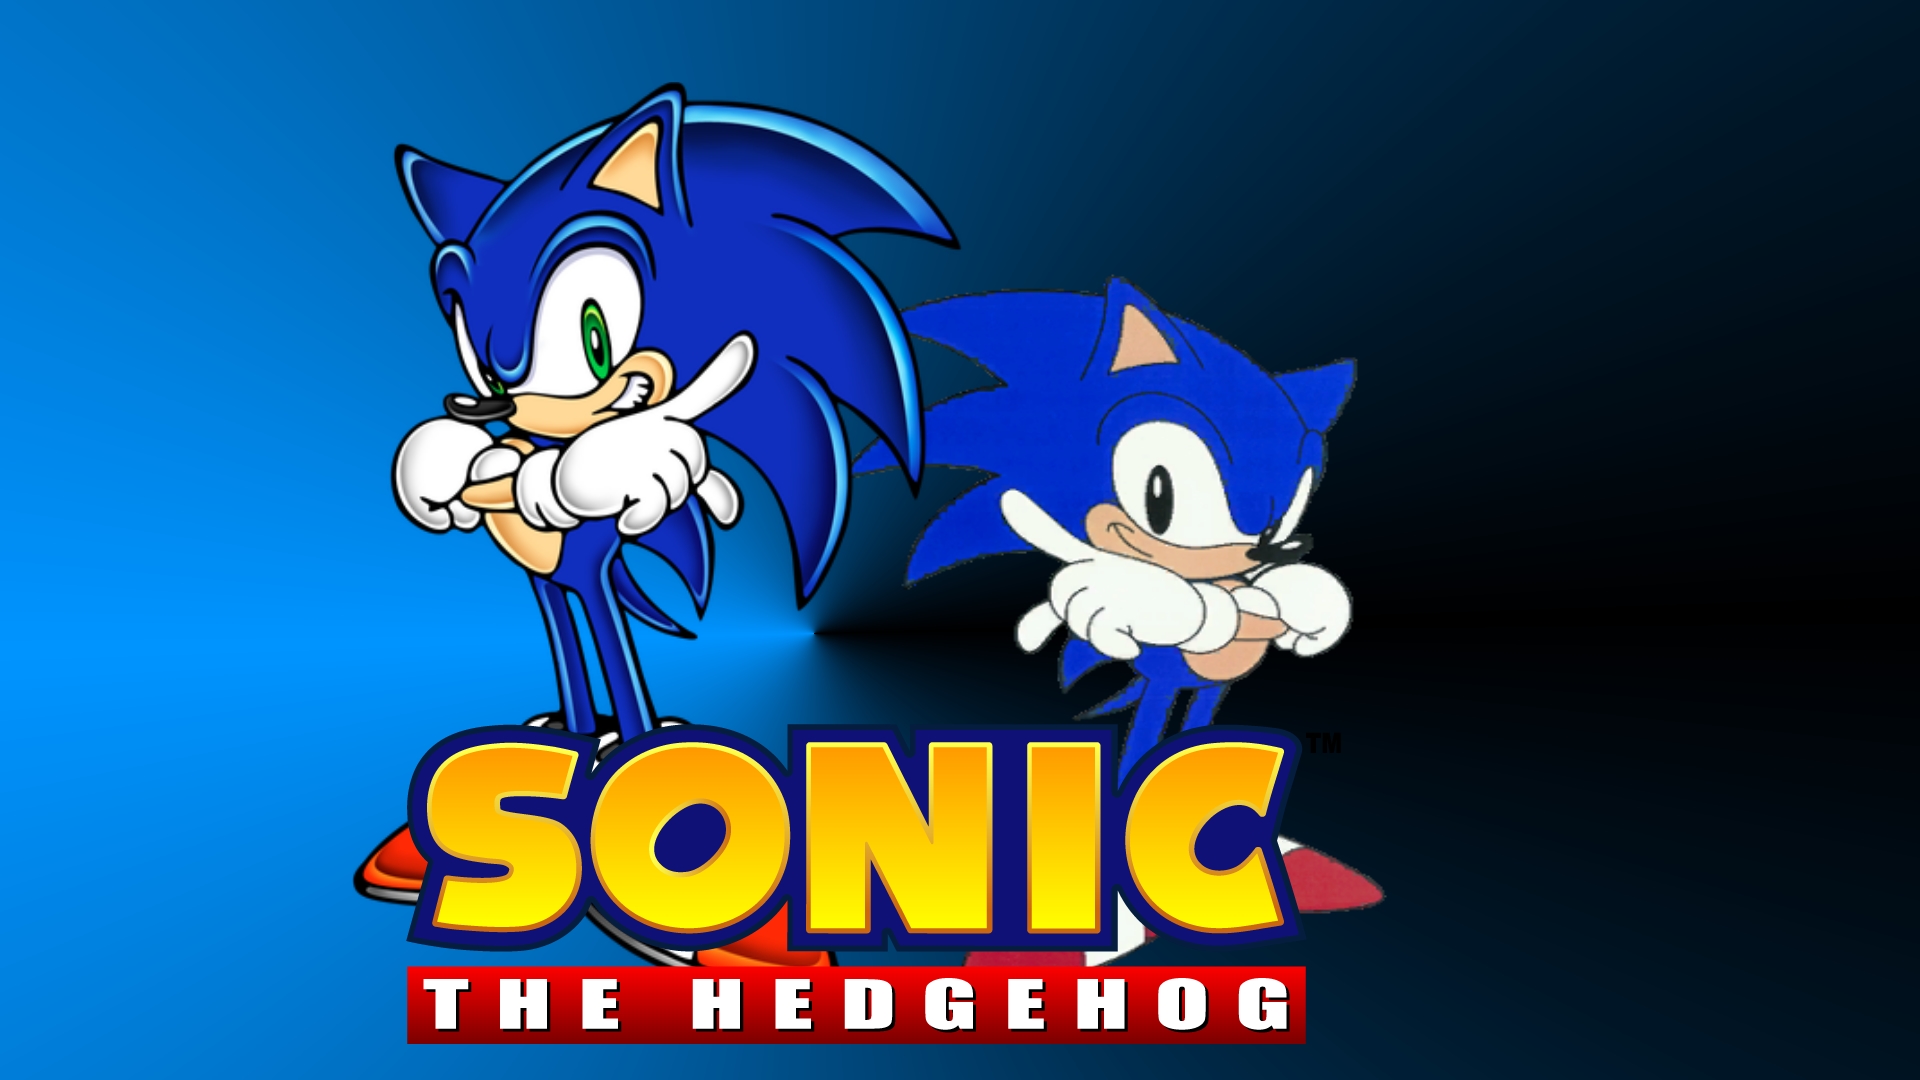 Download Sonic Wallpaper Computer Of Rise Figurine Mania HQ PNG Image   FreePNGImg